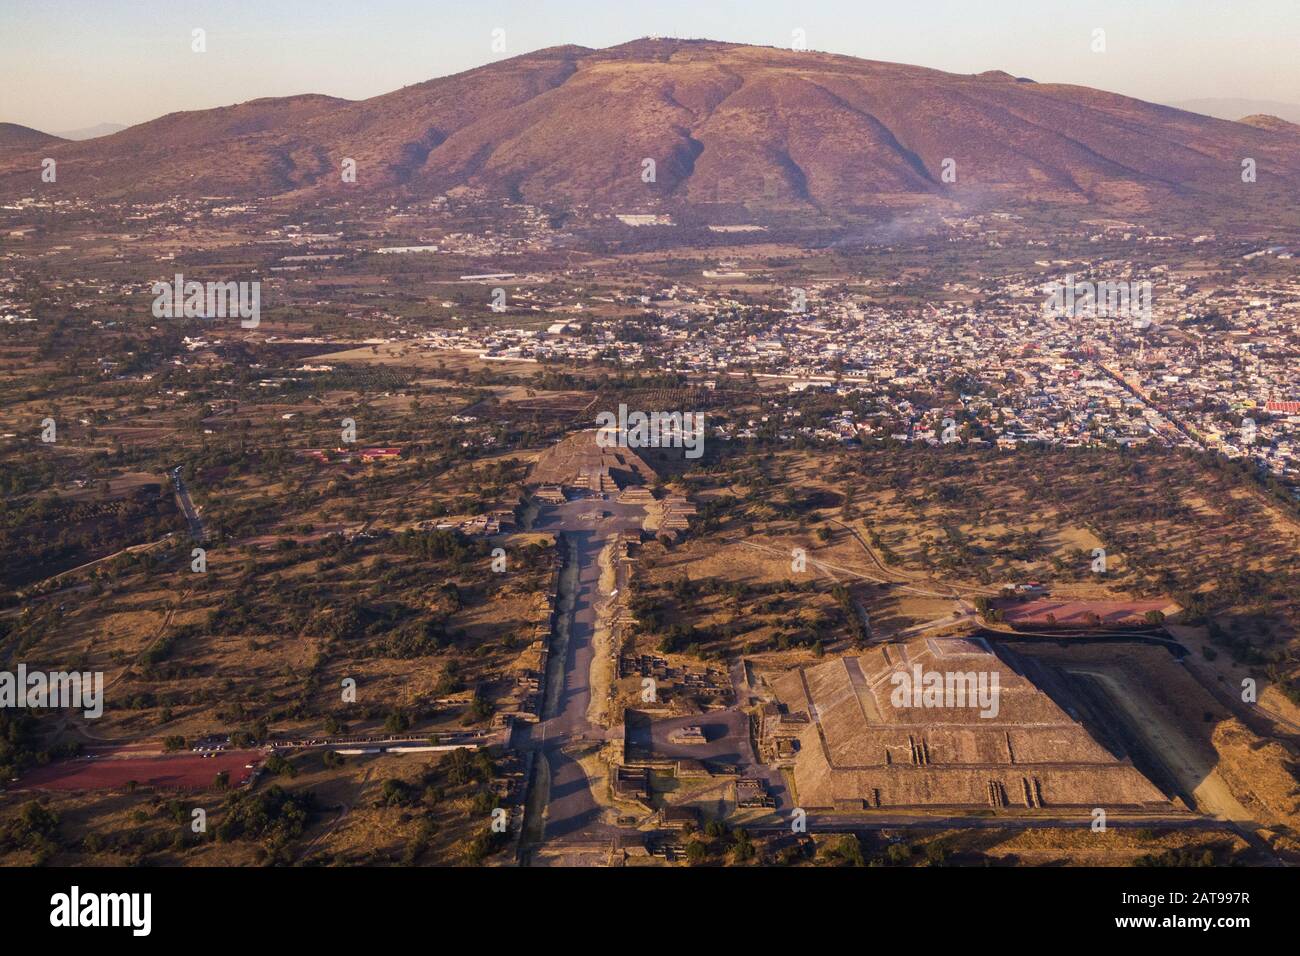 Aerial view of the ancient Aztec city of Teotihuacan at sunset, Mexico. Stock Photo